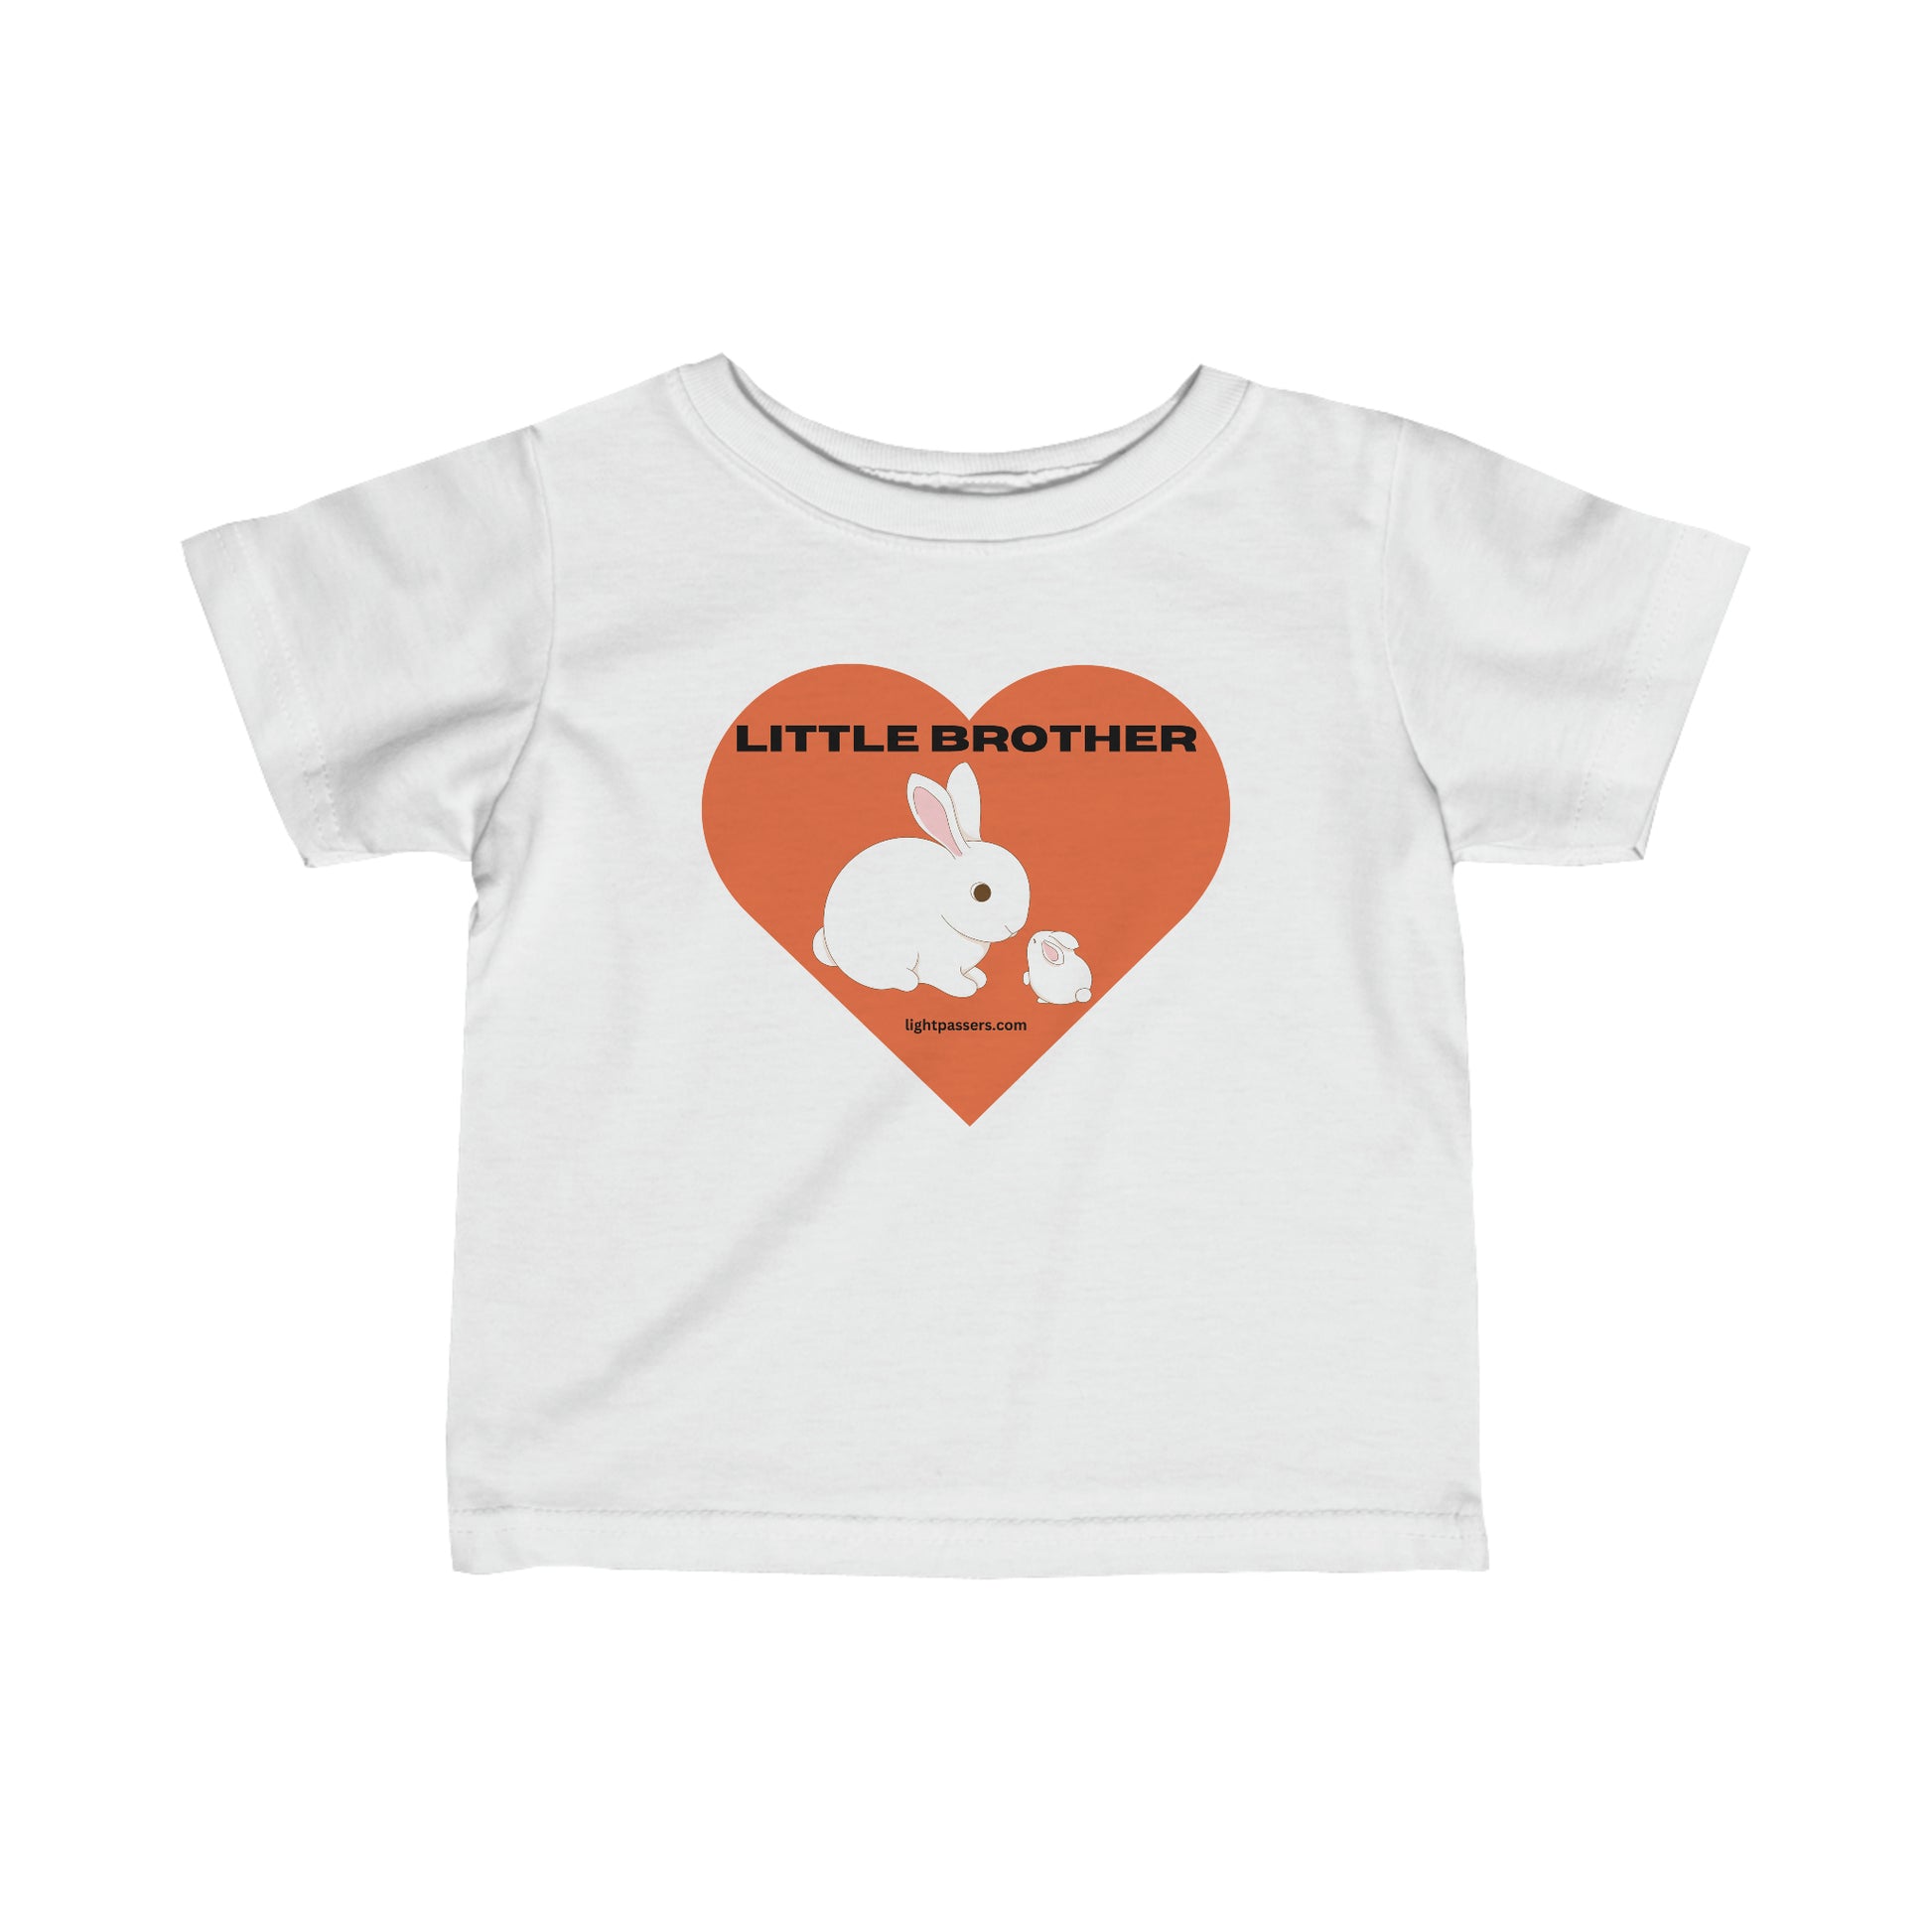 A white baby t-shirt featuring a rabbit and heart design, with side seams for shape support, ribbed knitting for durability, and taped shoulders for a comfy fit.